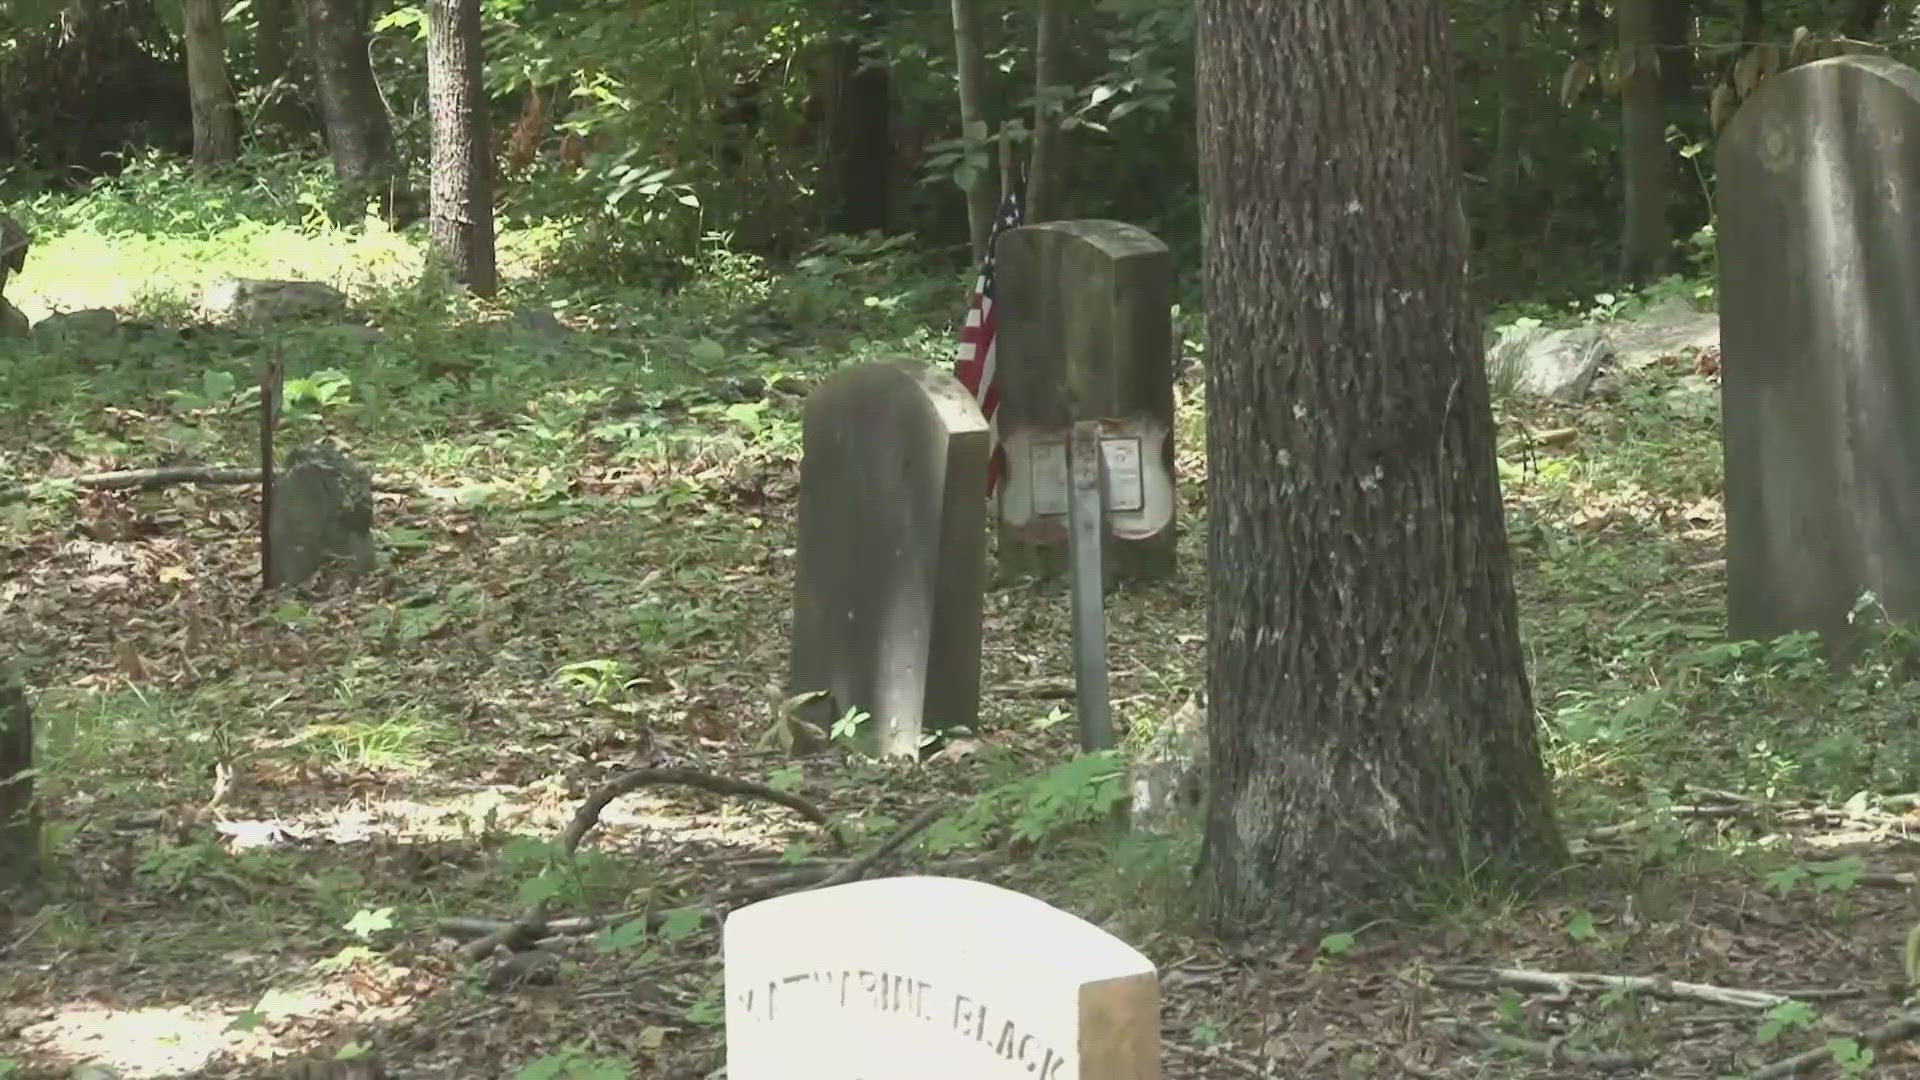 The once-neglected Black Family Cemetery has been open to the public since 2021.